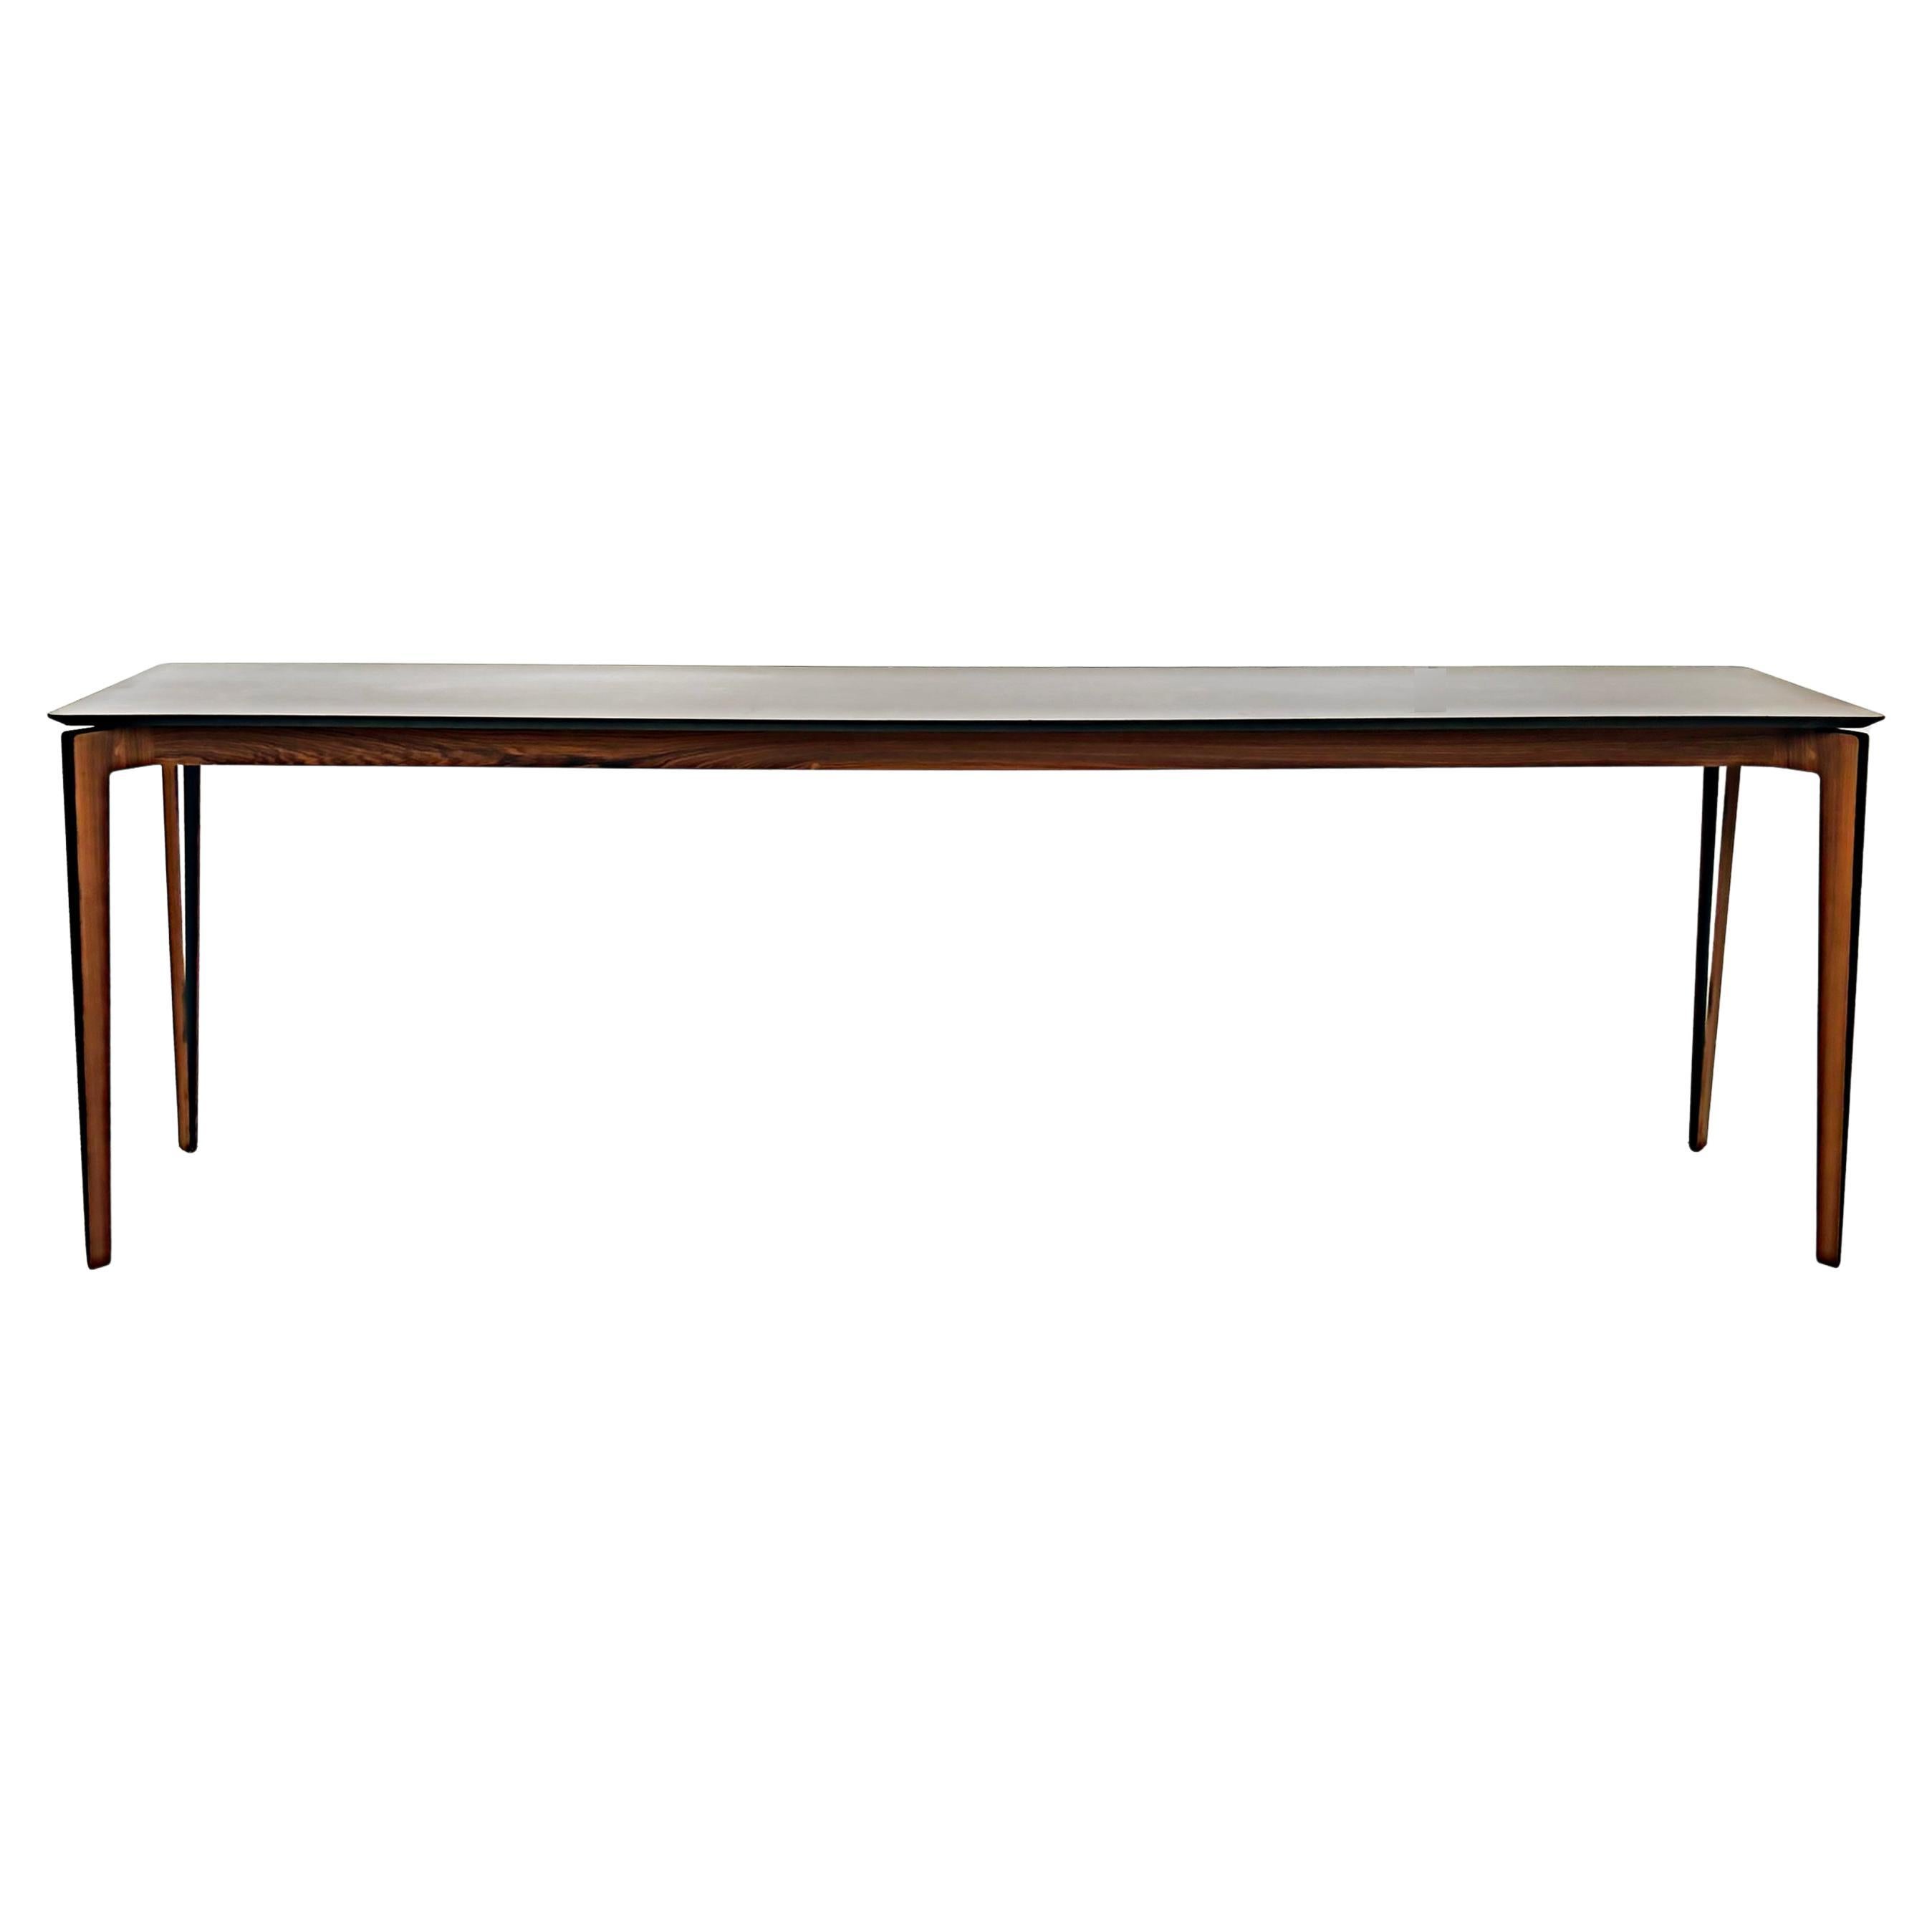 Artefacto Brazilian Exotic Wood Console Table, Canted  Double Tapering Legs